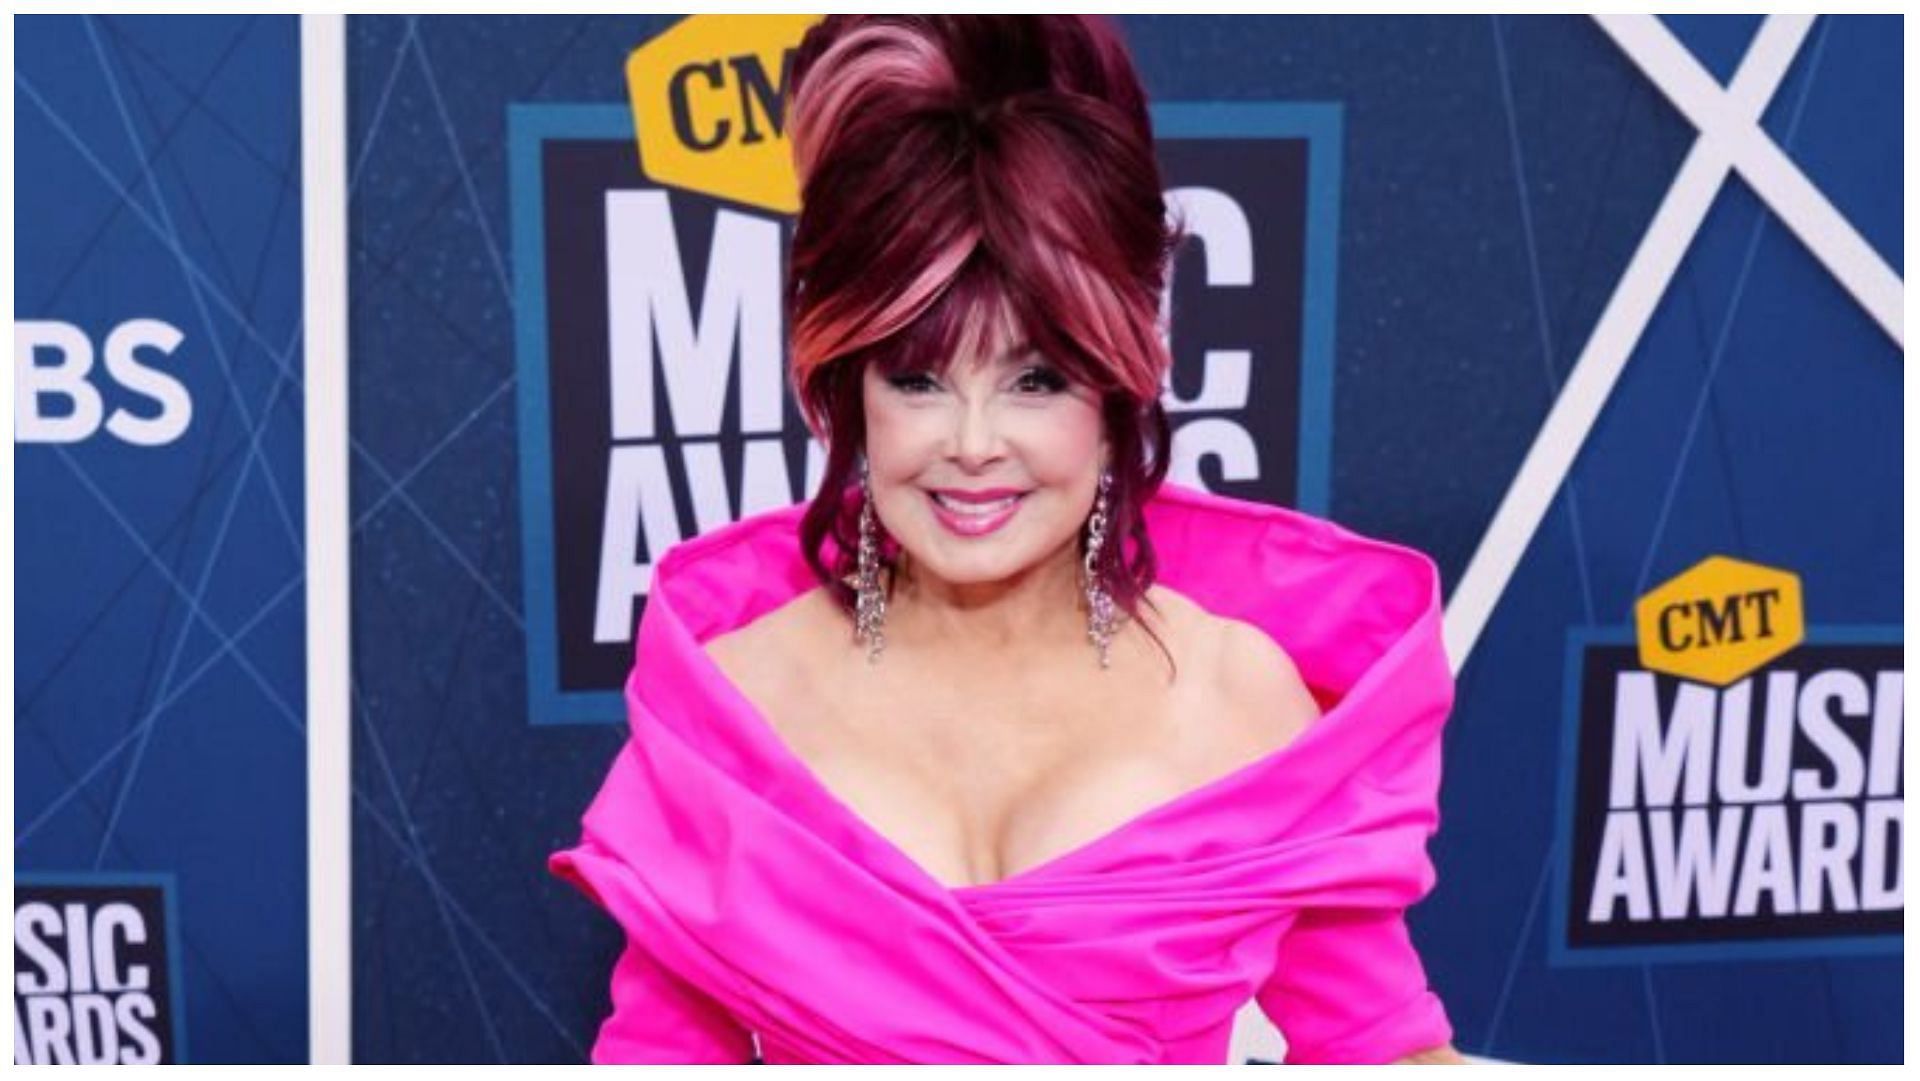 Naomi Judd has not left anything for her daughters in her will (Image via Jeff Kravitz/Getty Images)